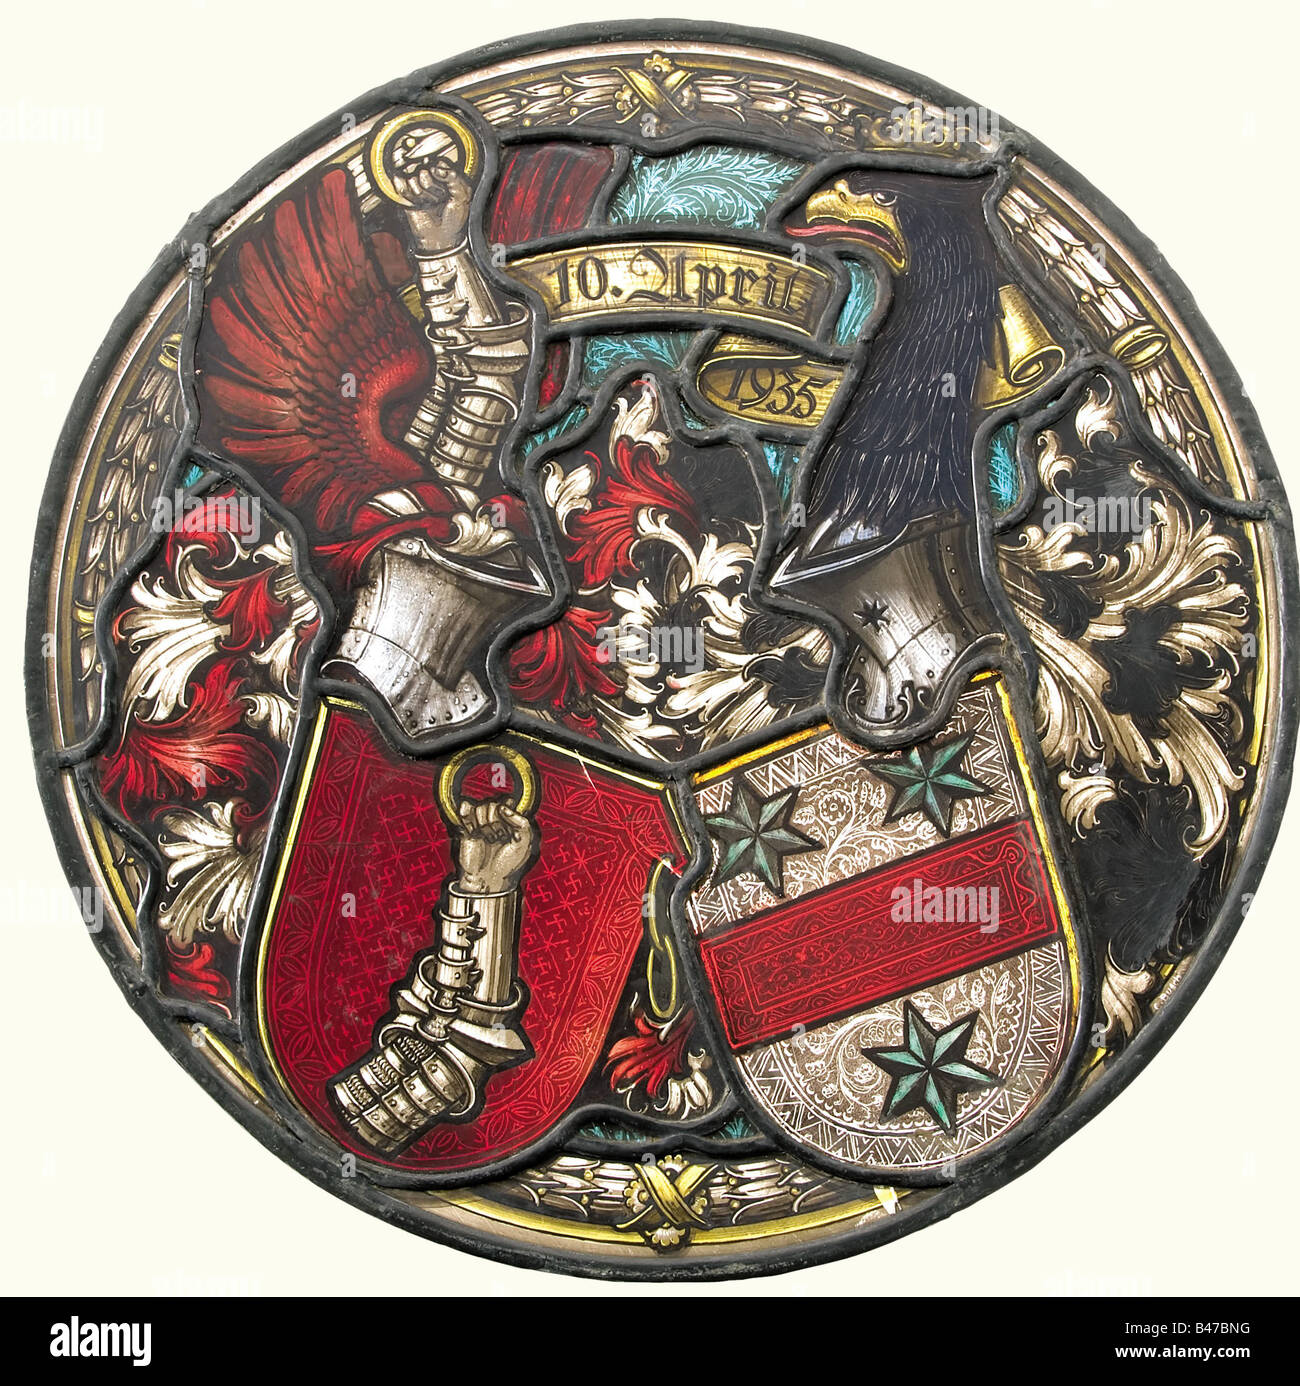 Hermann Göring and Emmy Sonnemann, a stained glass coat of arms A gift from Adolf Hitler to Hermann Göring and Emmy Sonnemann on the occasion of their wedding on 10 April 1935. Very fine coloured painting of the marriage coat of arms of the wedding pair, the shield of Göring's arms is covered with small swastikas. The wedding date, "10. April 1935" between the two helmet plumes. The artist's signature, "C. Busch" is at the lower right. Two small flaws. Diameter 38 cm. Enclosed is a notarially certified declaration by K. Frank Korf, soldier with the US 3rd Army,, Stock Photo